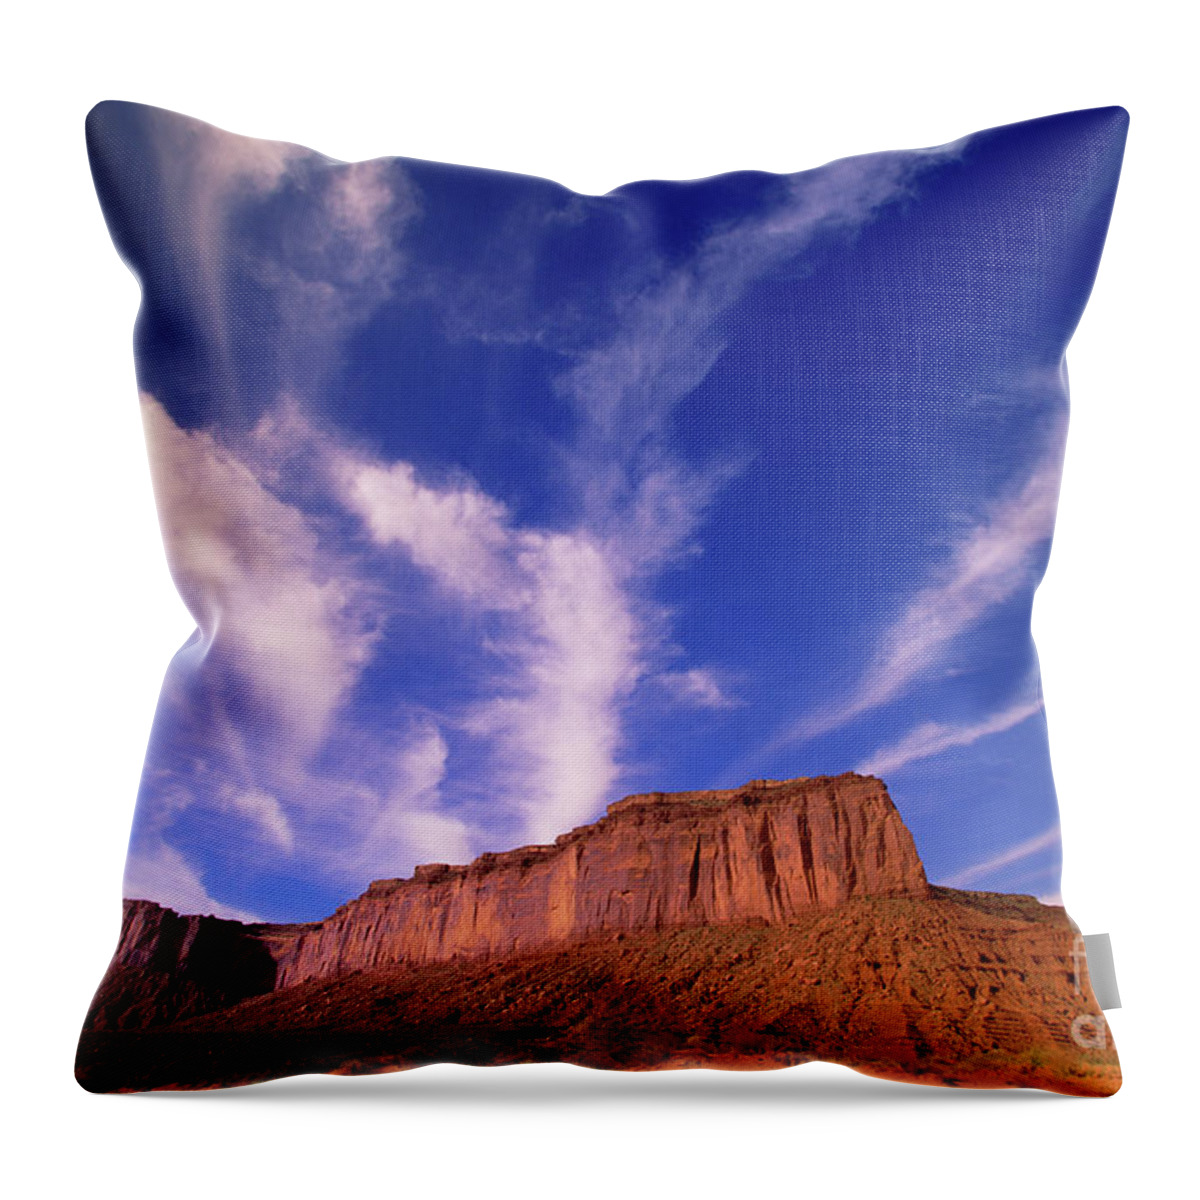 00340878 Throw Pillow featuring the photograph Clouds Over Monument Valley by Yva Momatiuk and John Eastcott